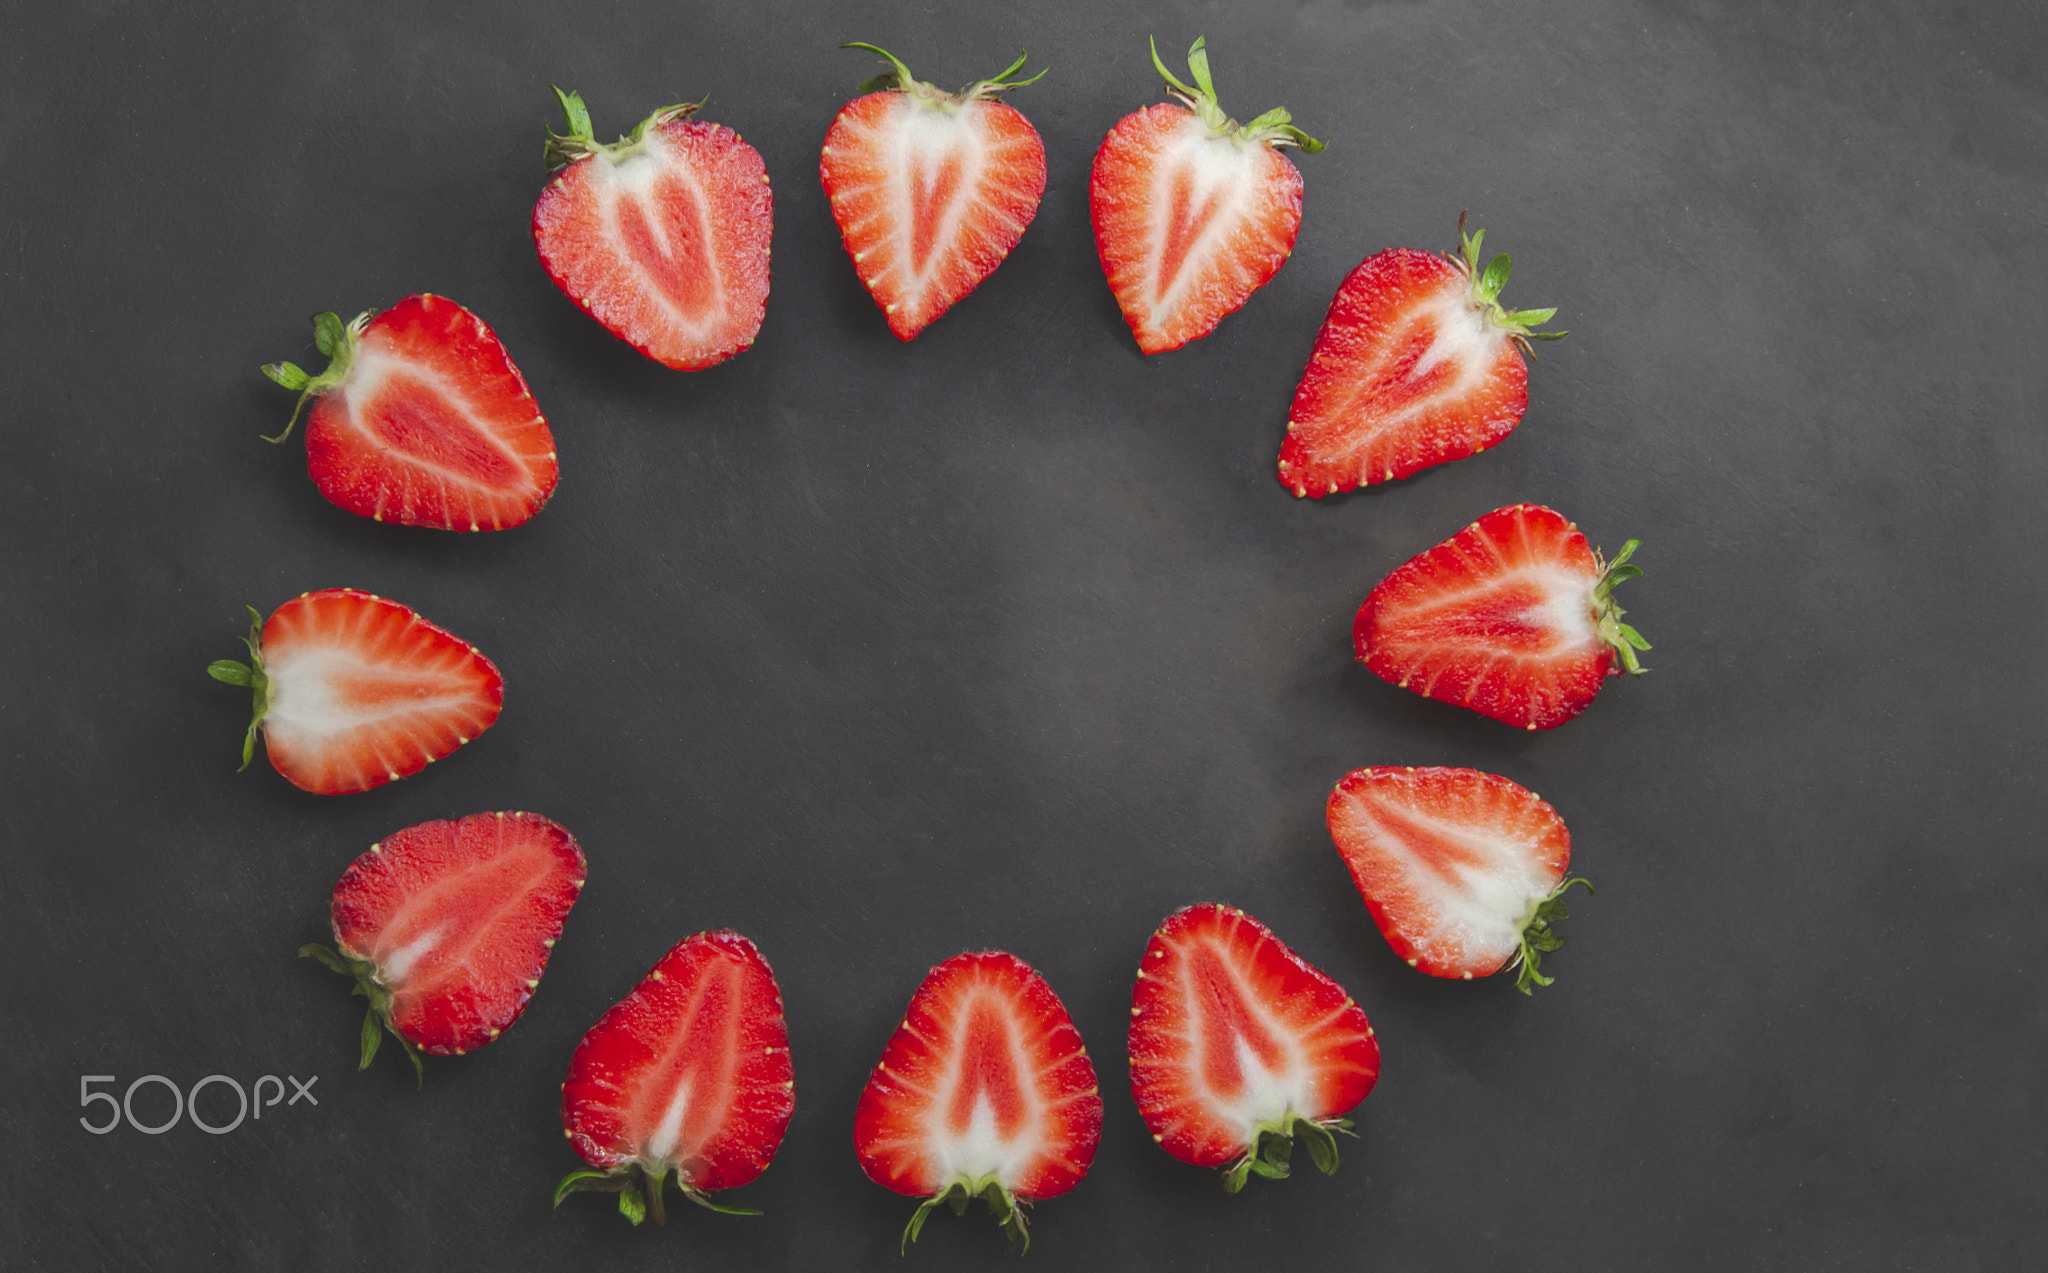 Close up picture of sliced strawberries on black background